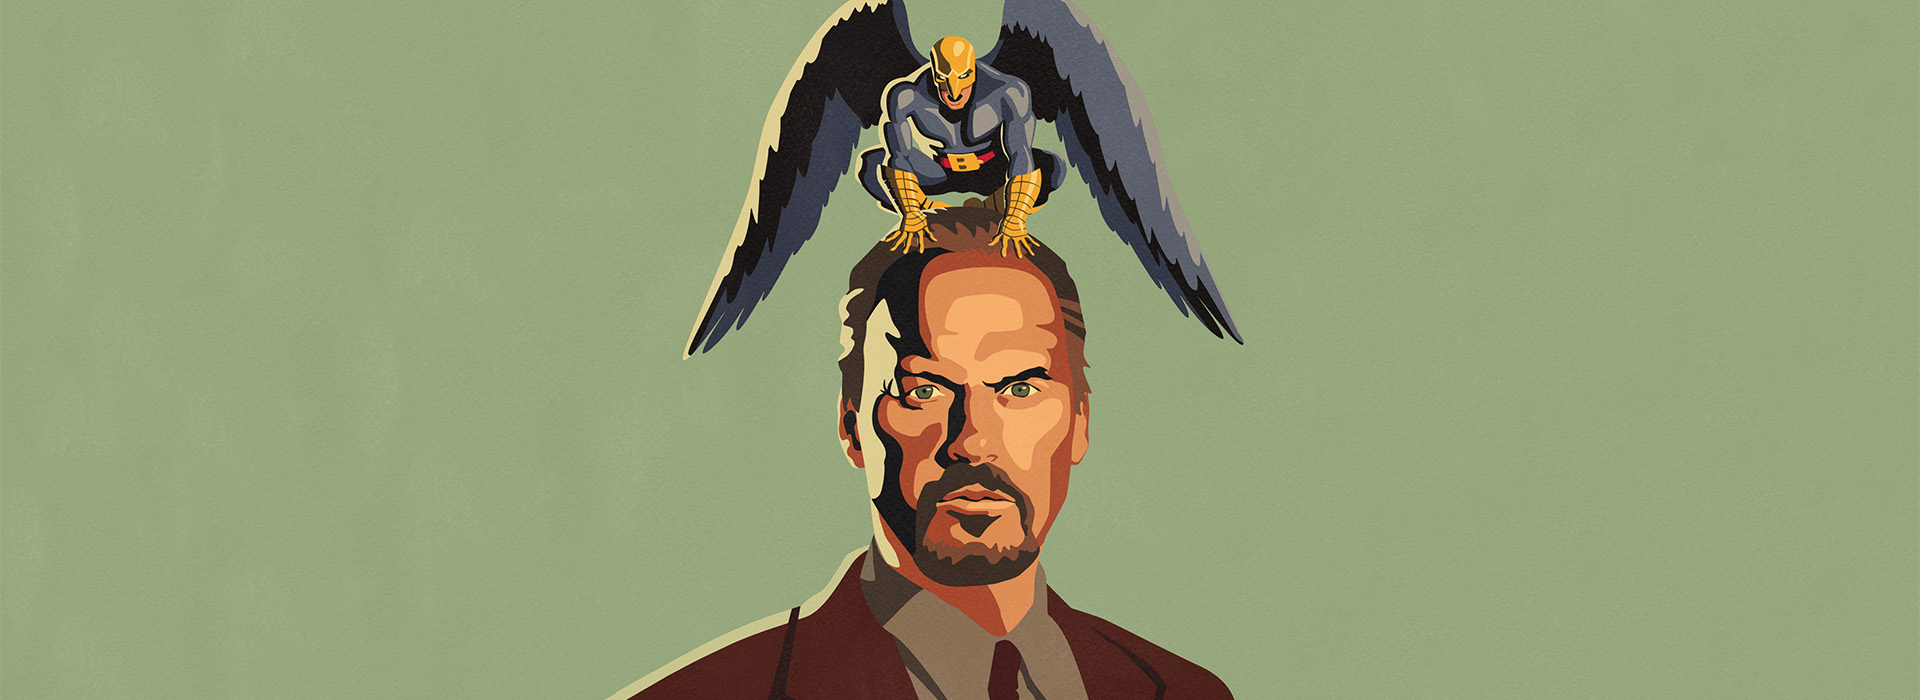 Movie poster Birdman or (The Unexpected Virtue of Ignorance)